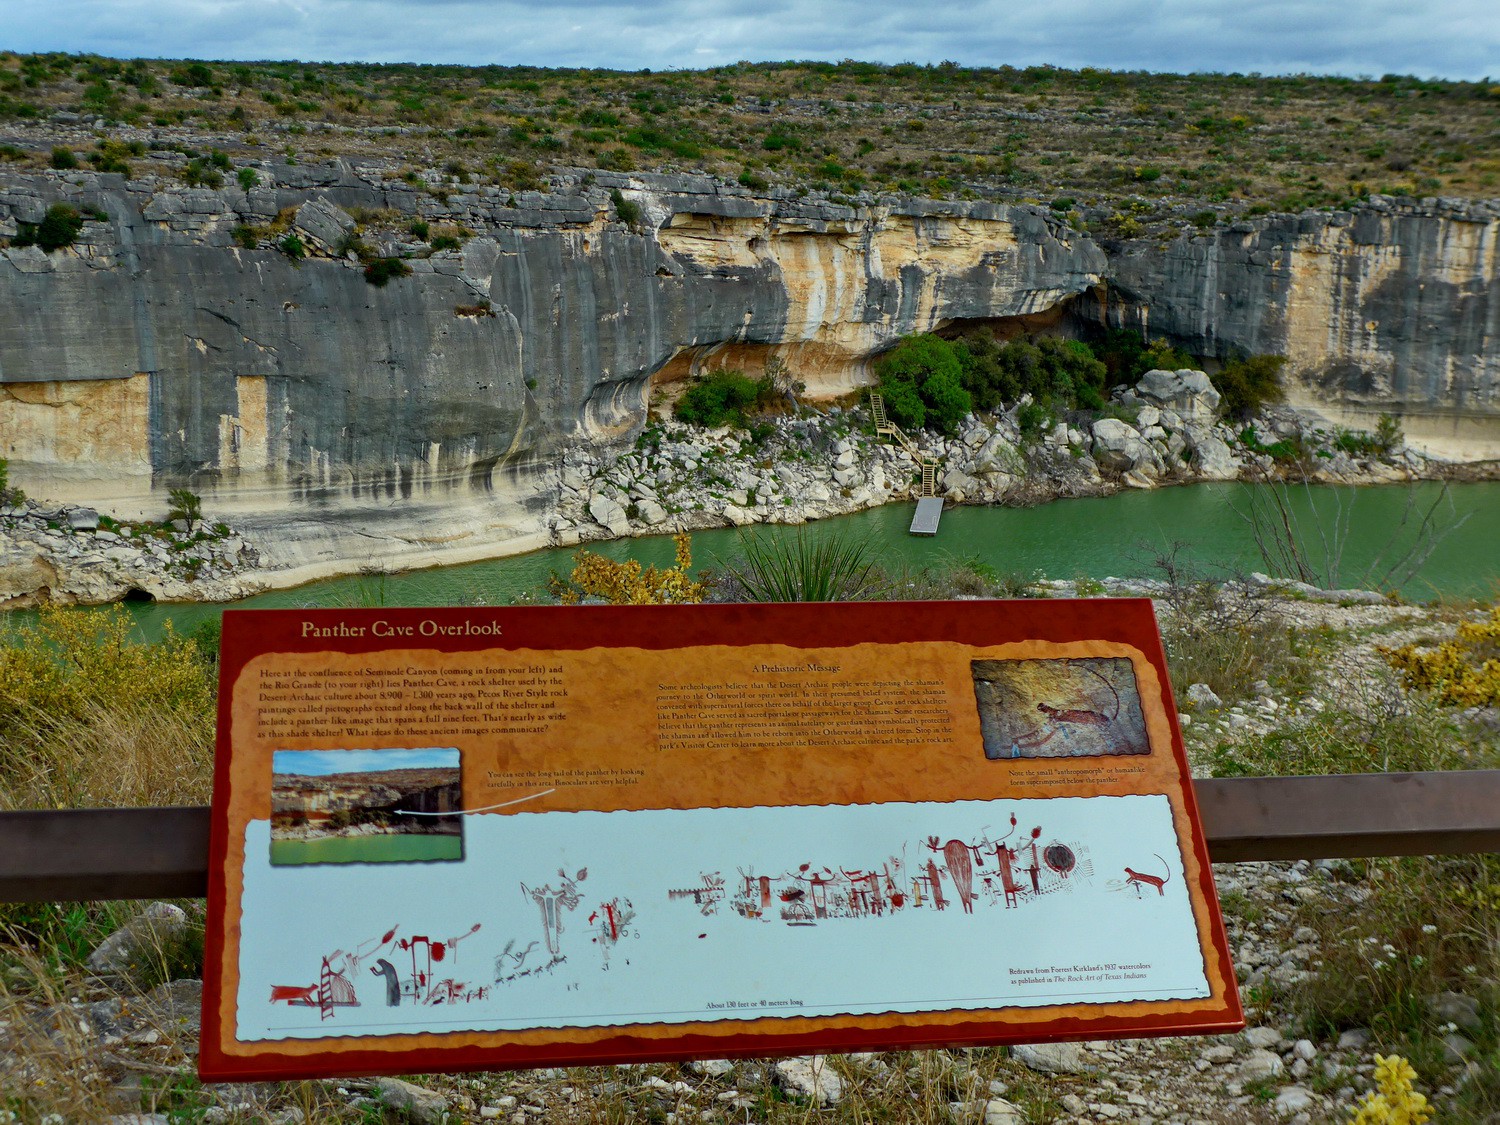 Description of the paintings in the Panther Cave on the mouth of the Seminole Canyon into Rio Grande